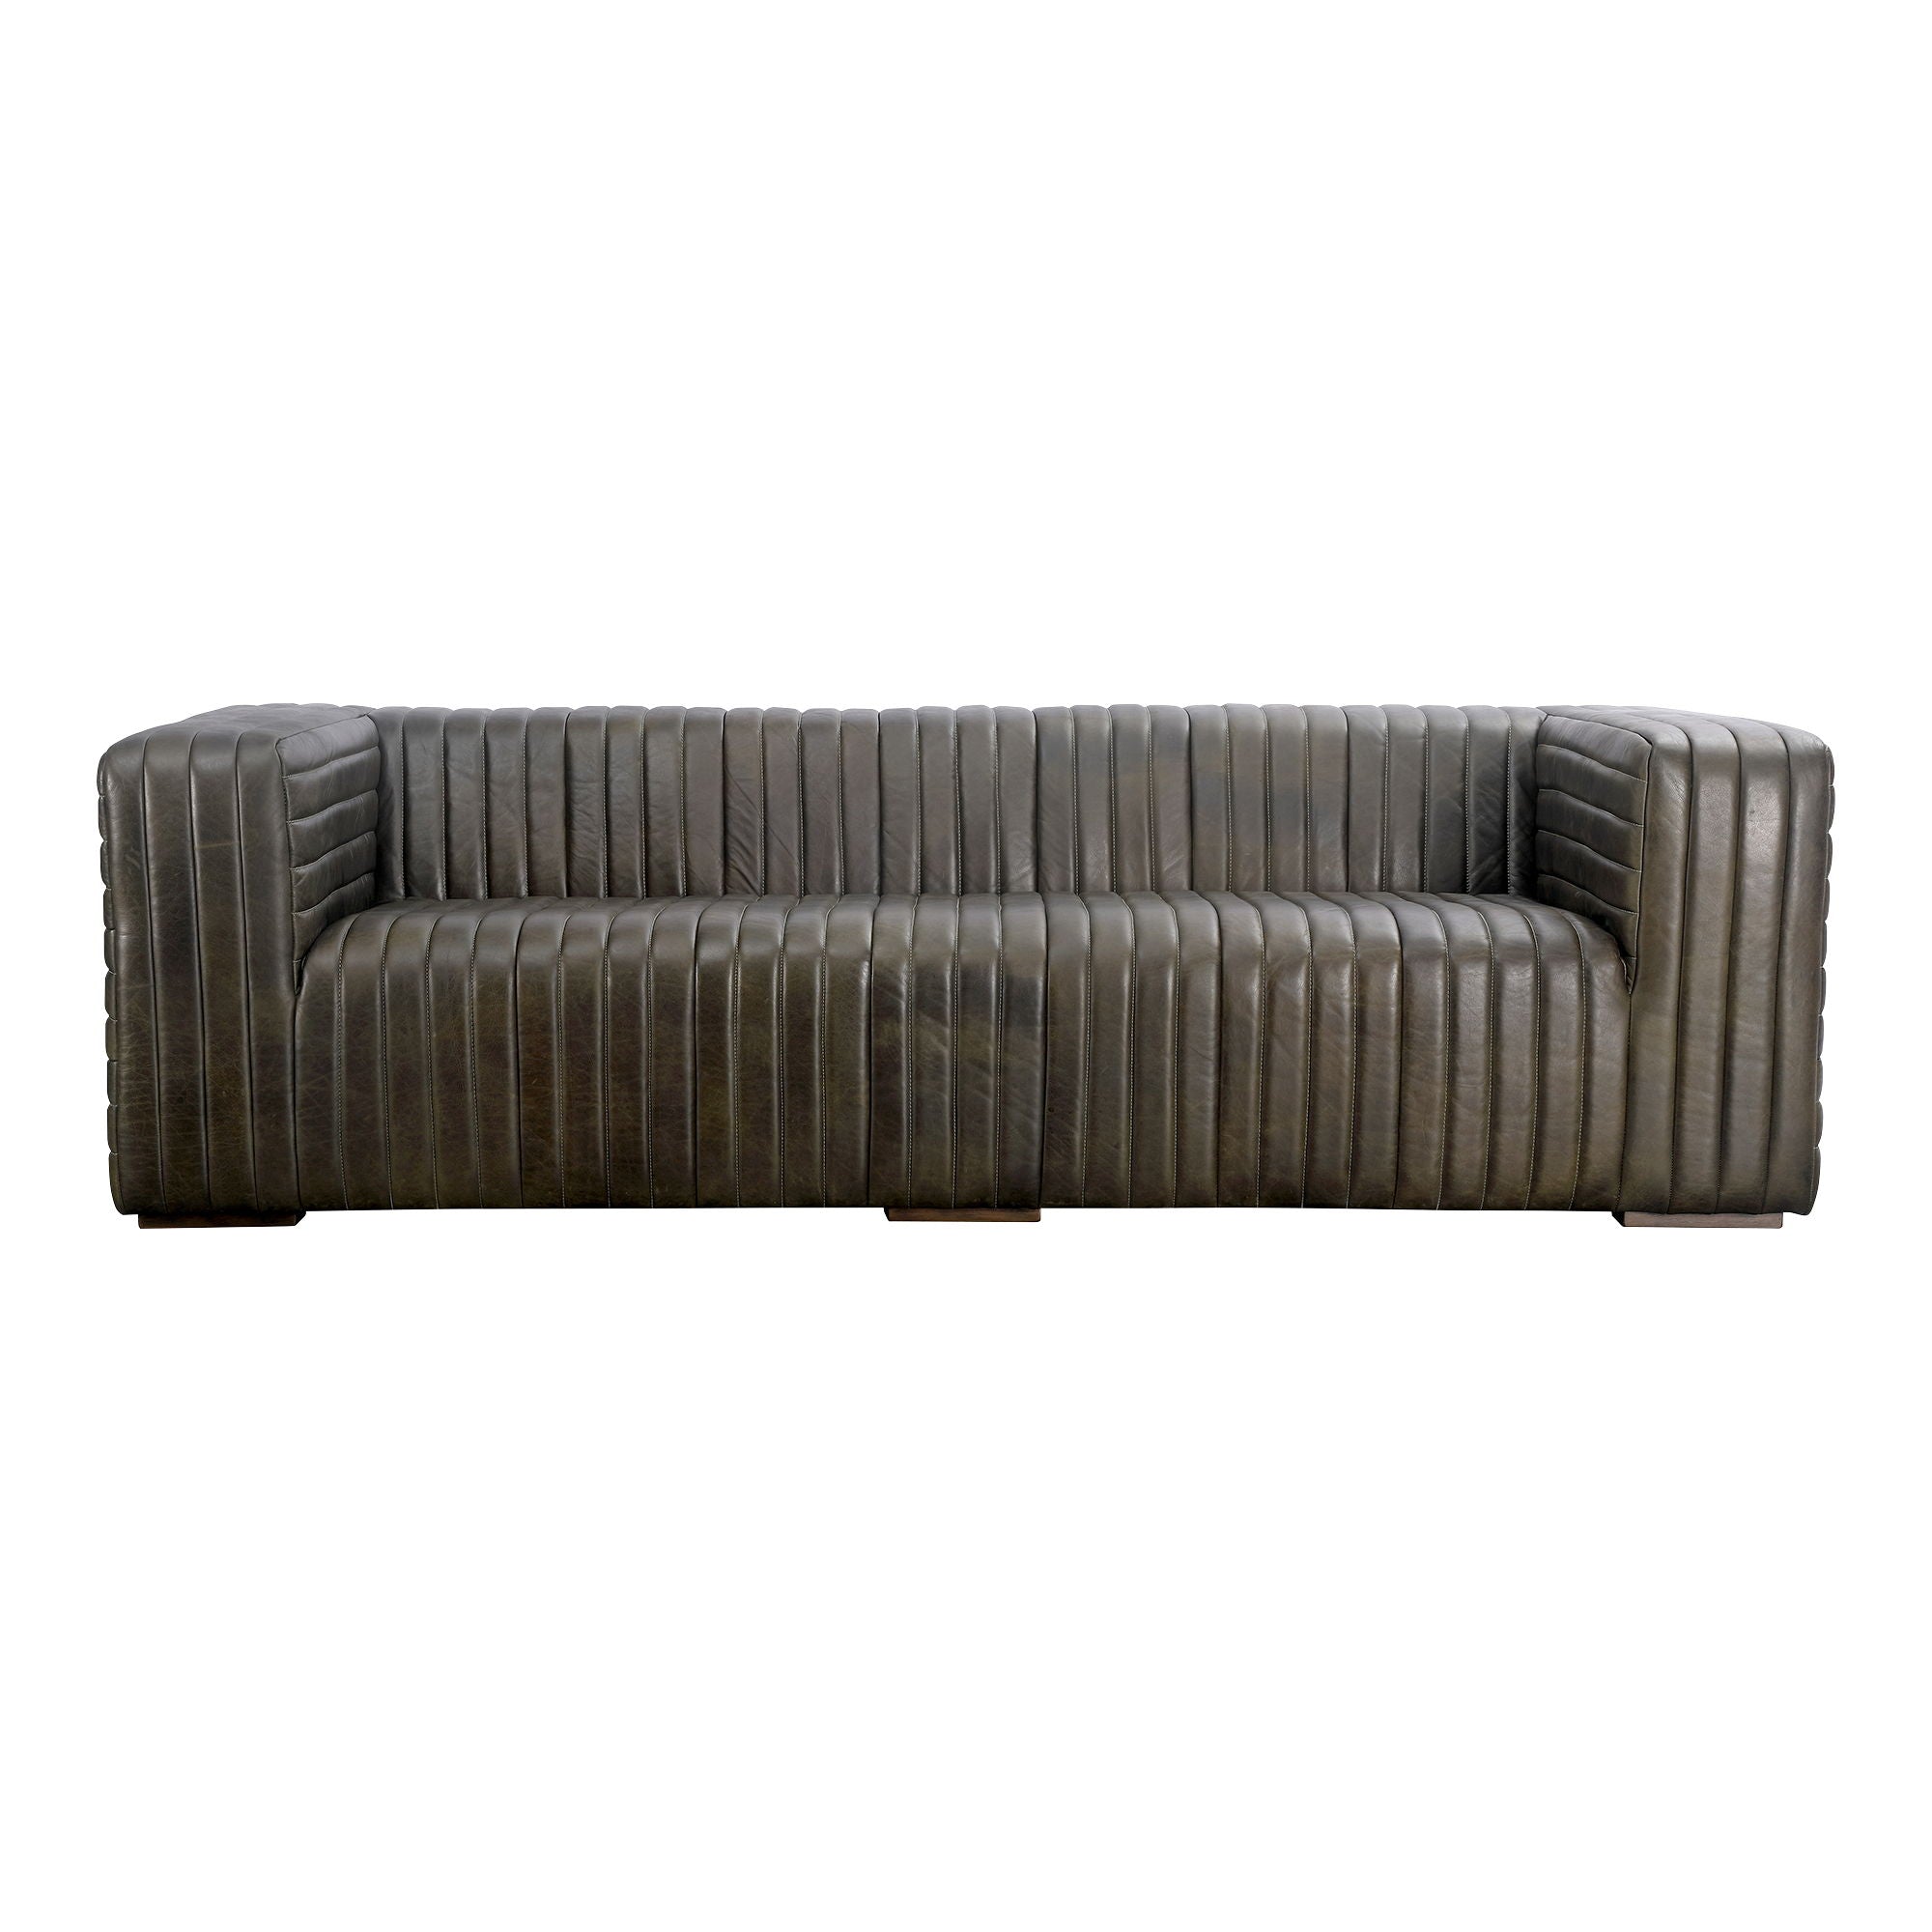 Castle Sofa - Olive Green Top-Grain Leather - Channel-Stitched Design - Stylish Living Room Furniture